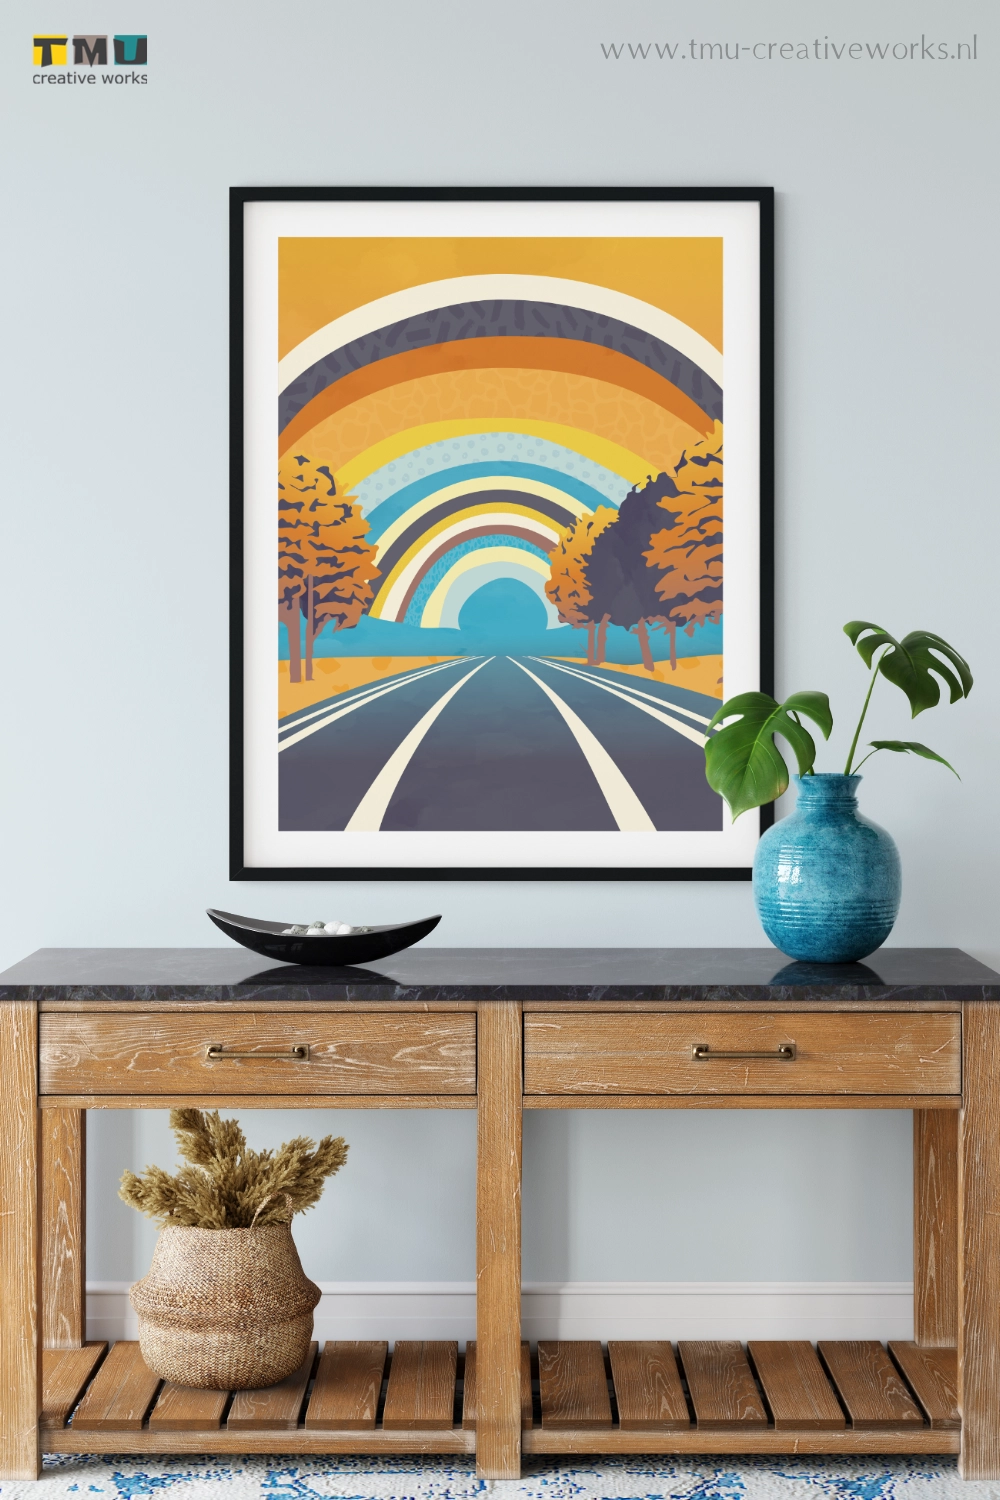 Into the sunset abstract landscape with retro-style sunburst design 5 mockup 2